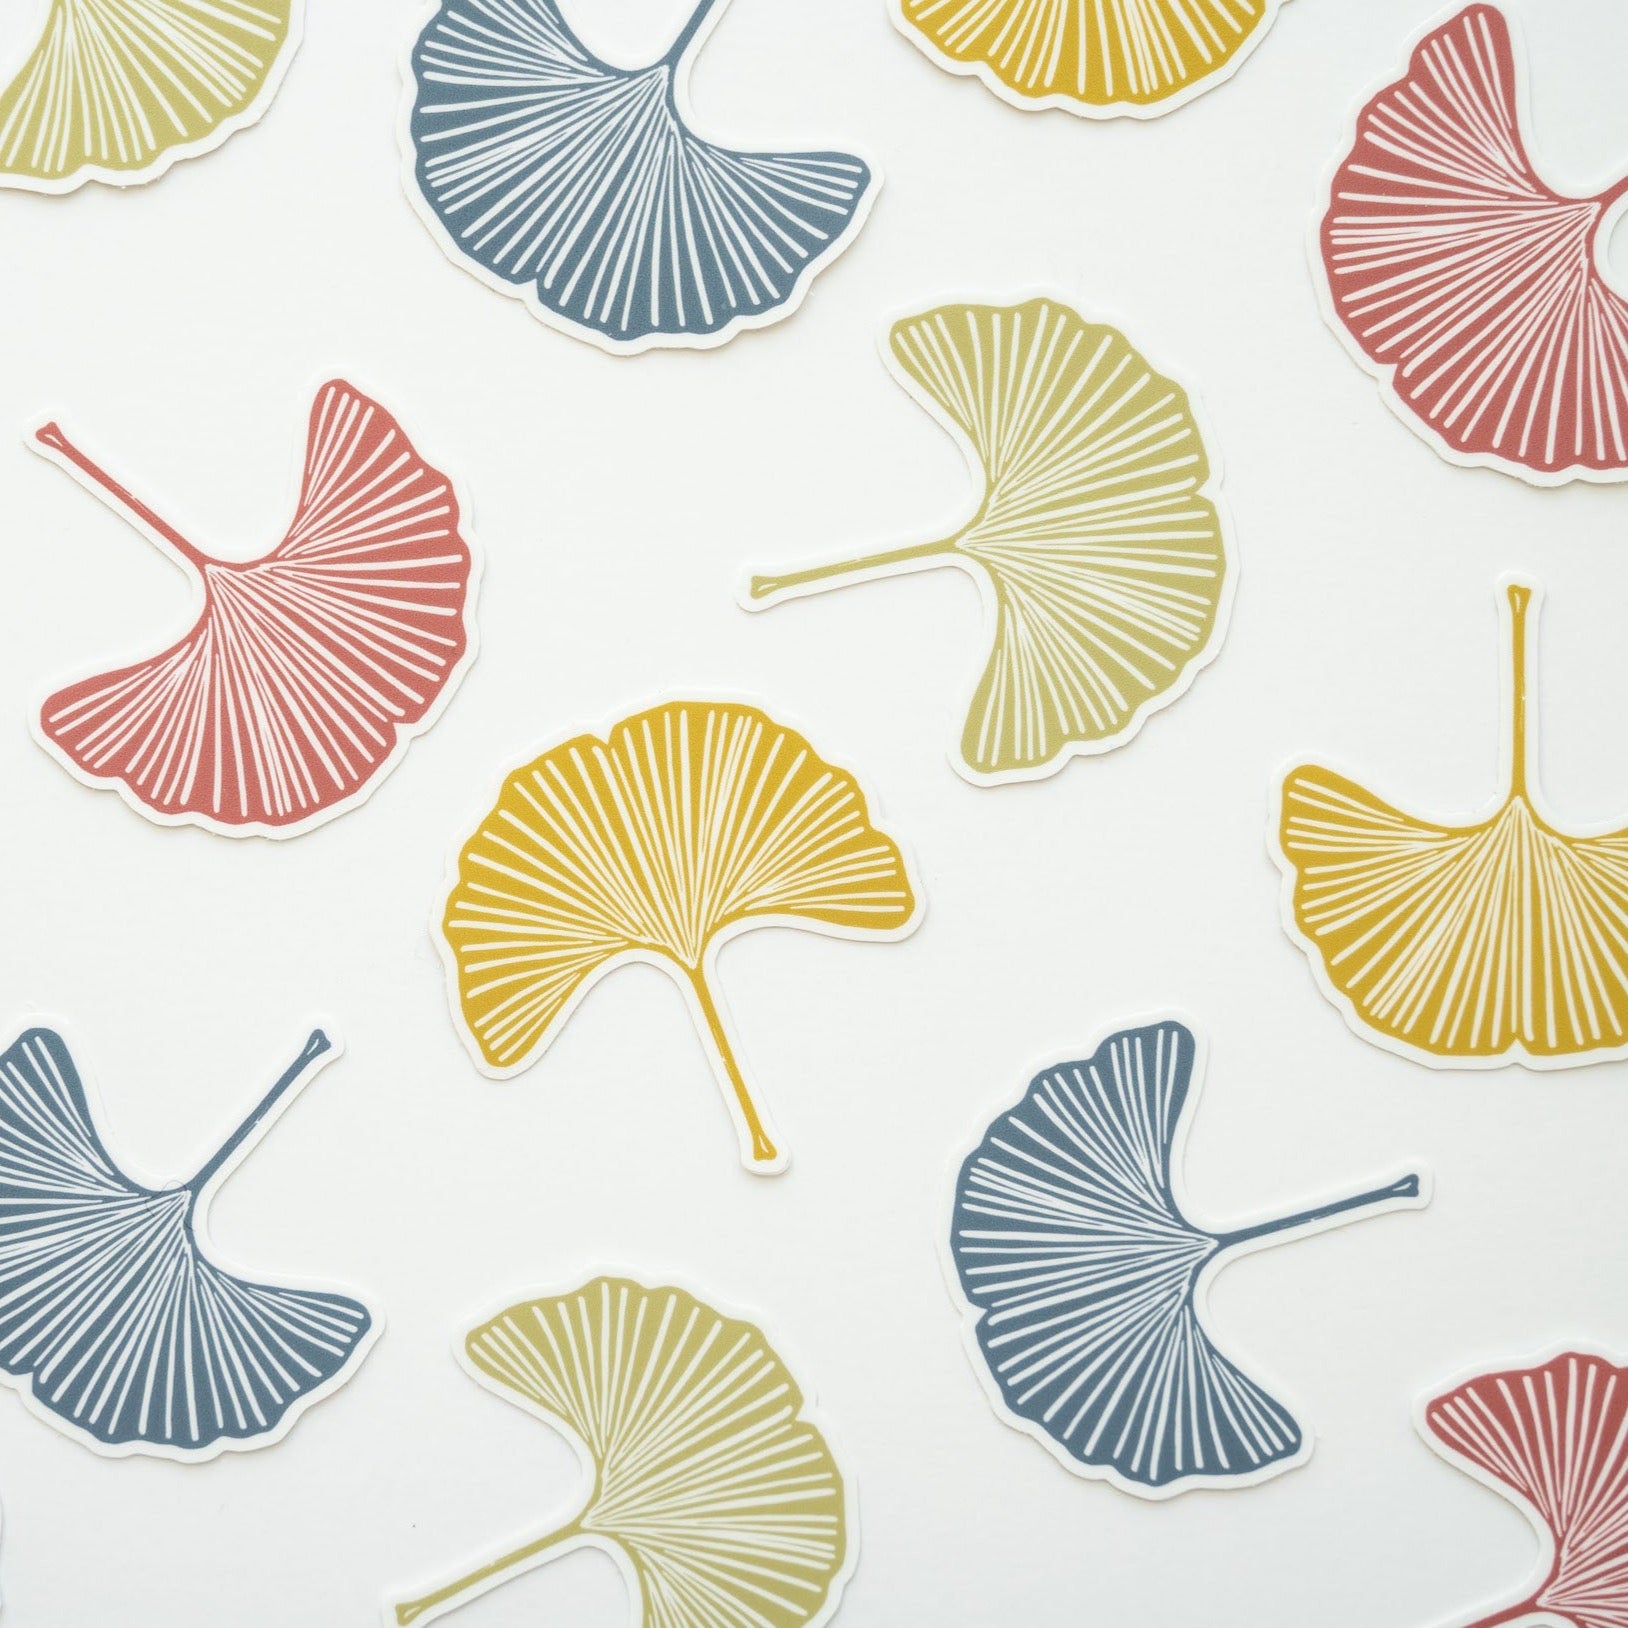 Individually vinyl ginkgo leaf stickers in green, blue, prink, and gold